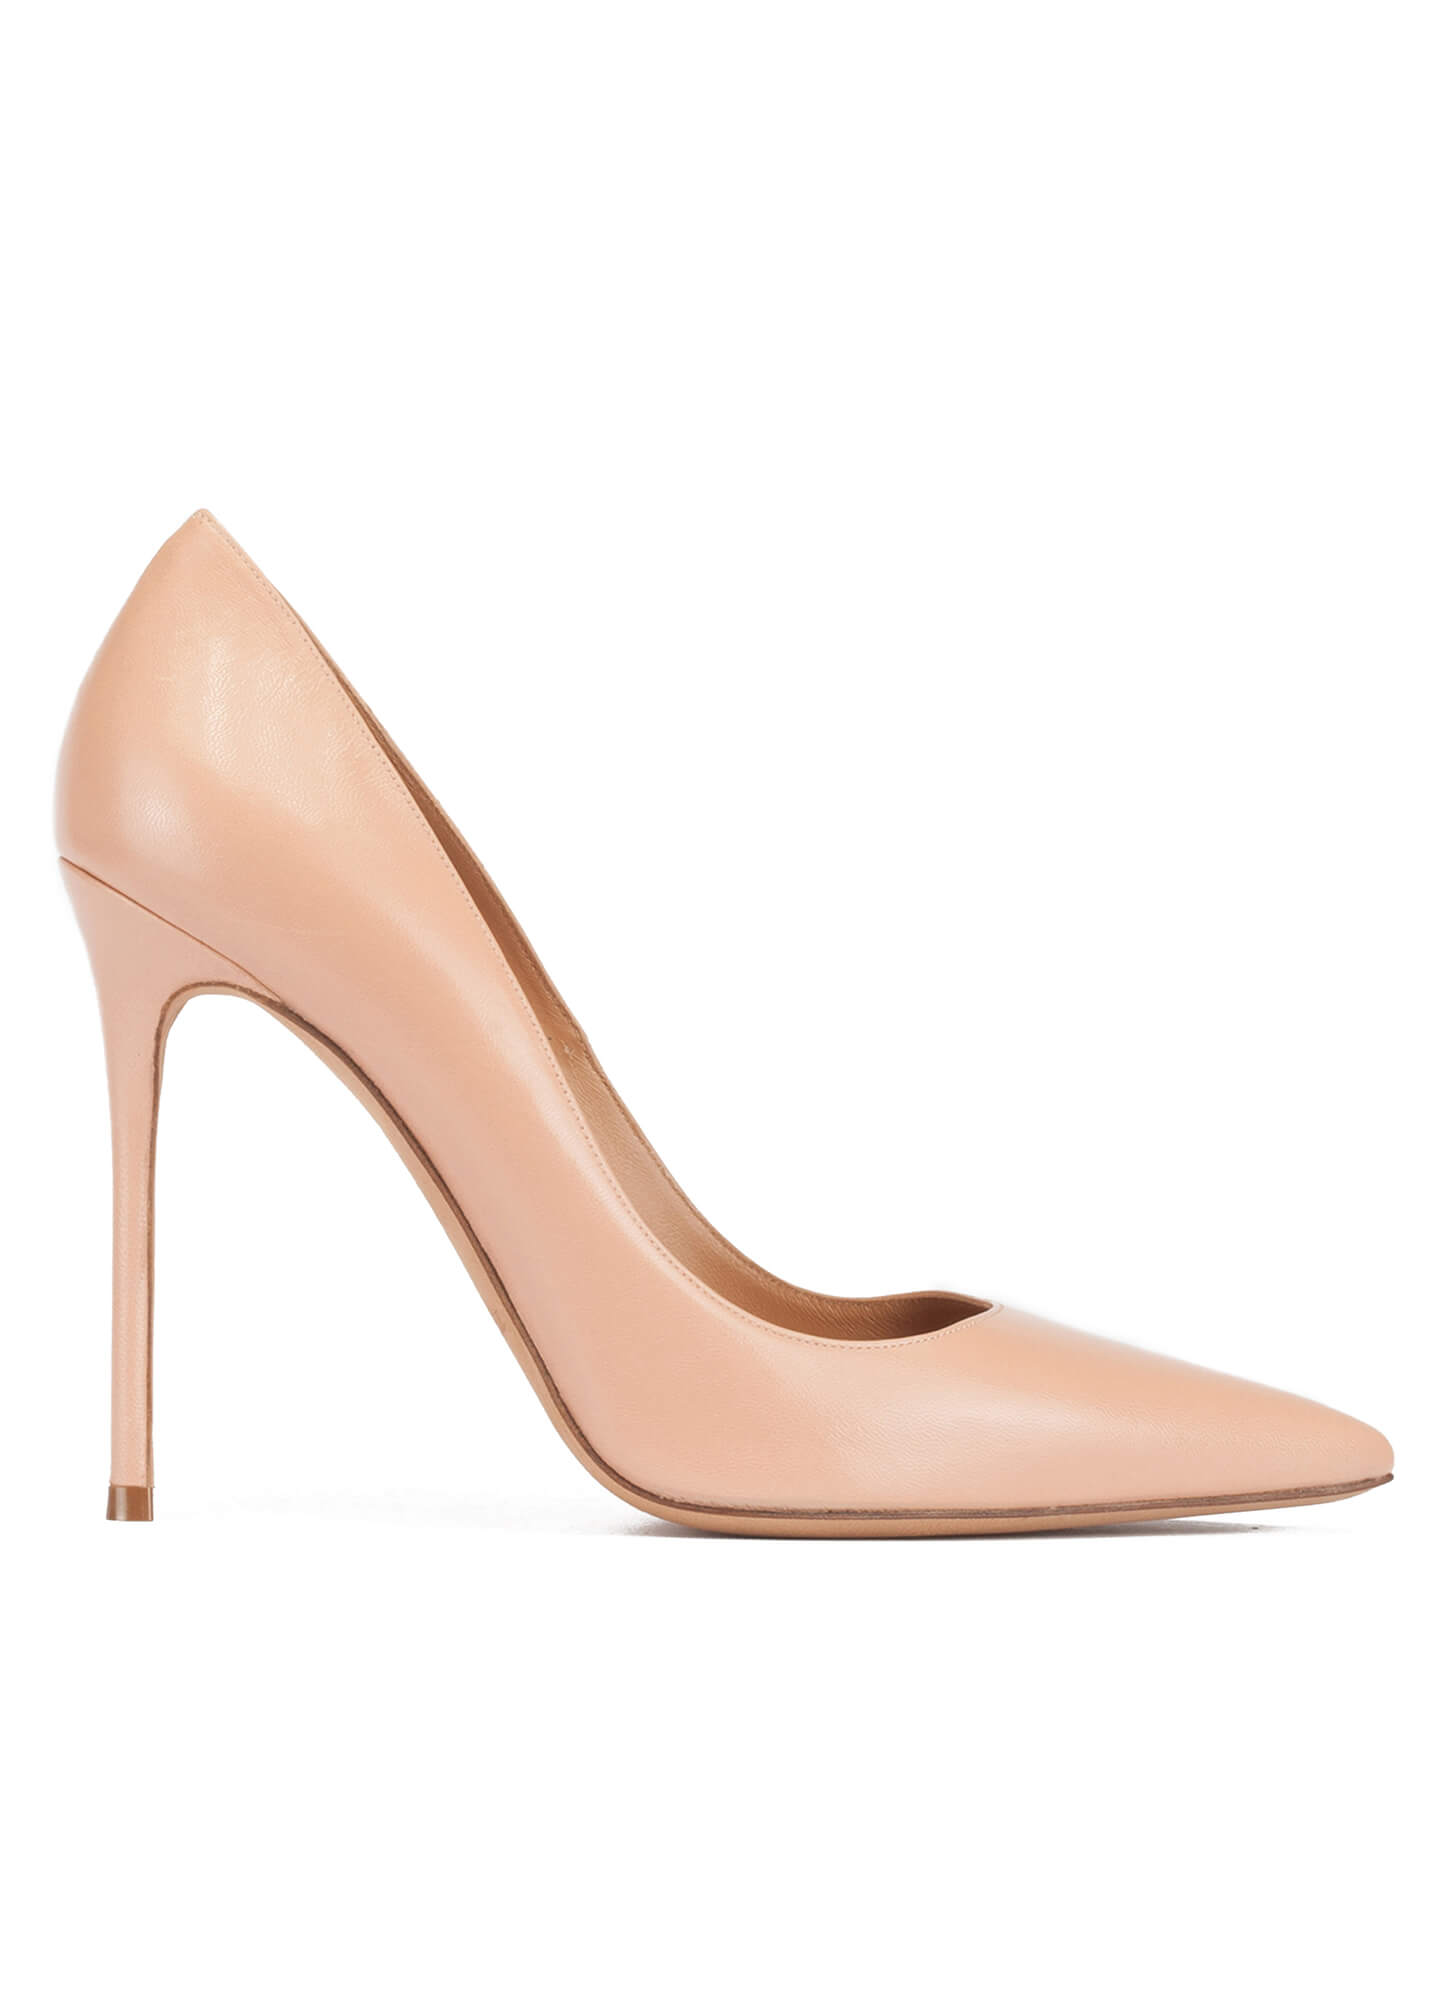 Bakers Crawford Nude Suede Classic Pump Stiletto High Heel Closed Toe ...